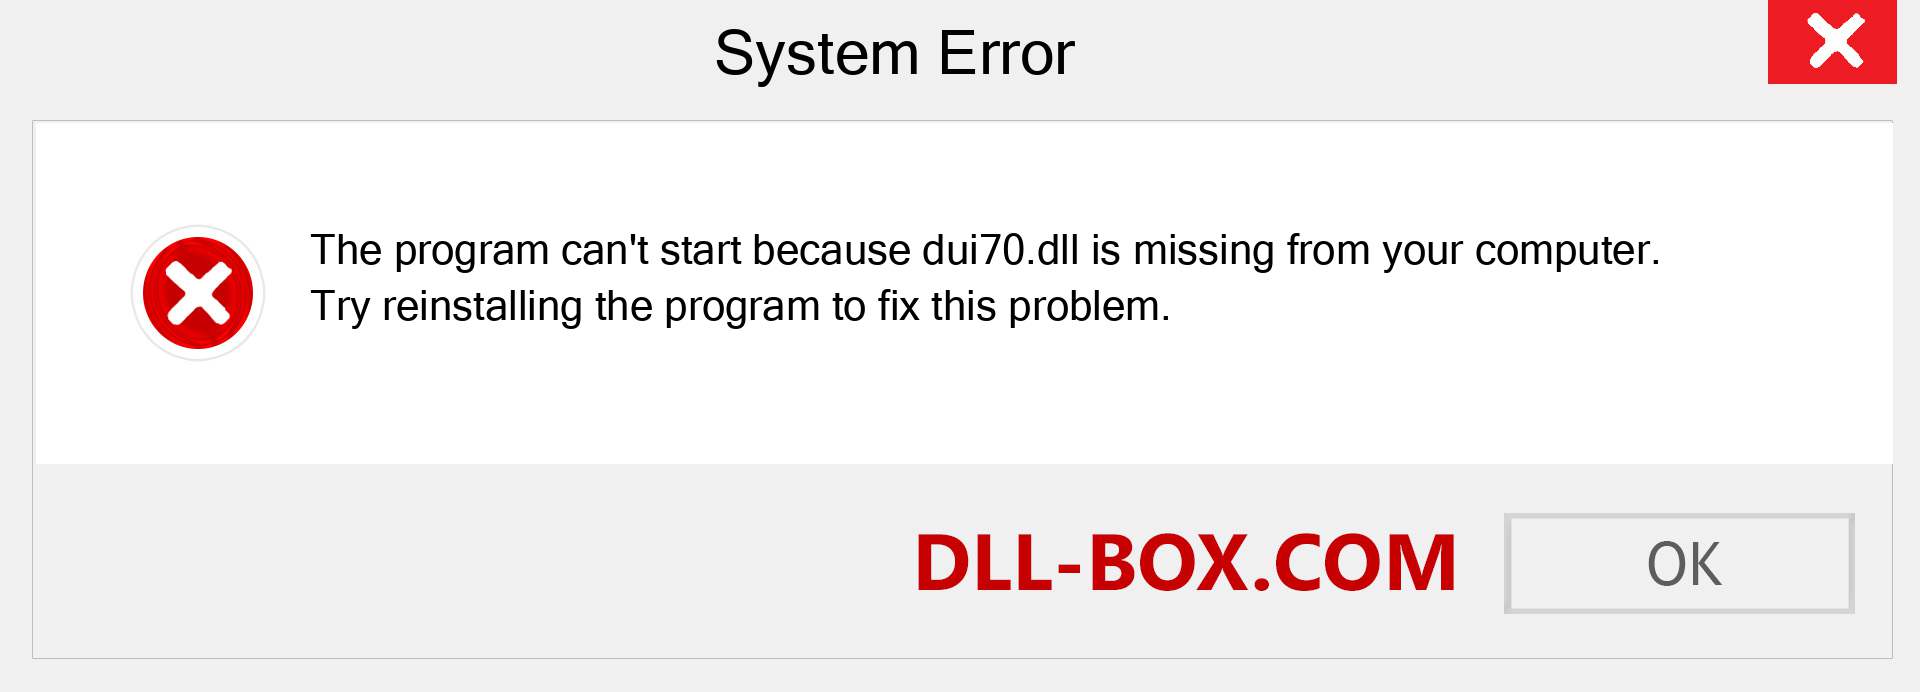  dui70.dll file is missing?. Download for Windows 7, 8, 10 - Fix  dui70 dll Missing Error on Windows, photos, images